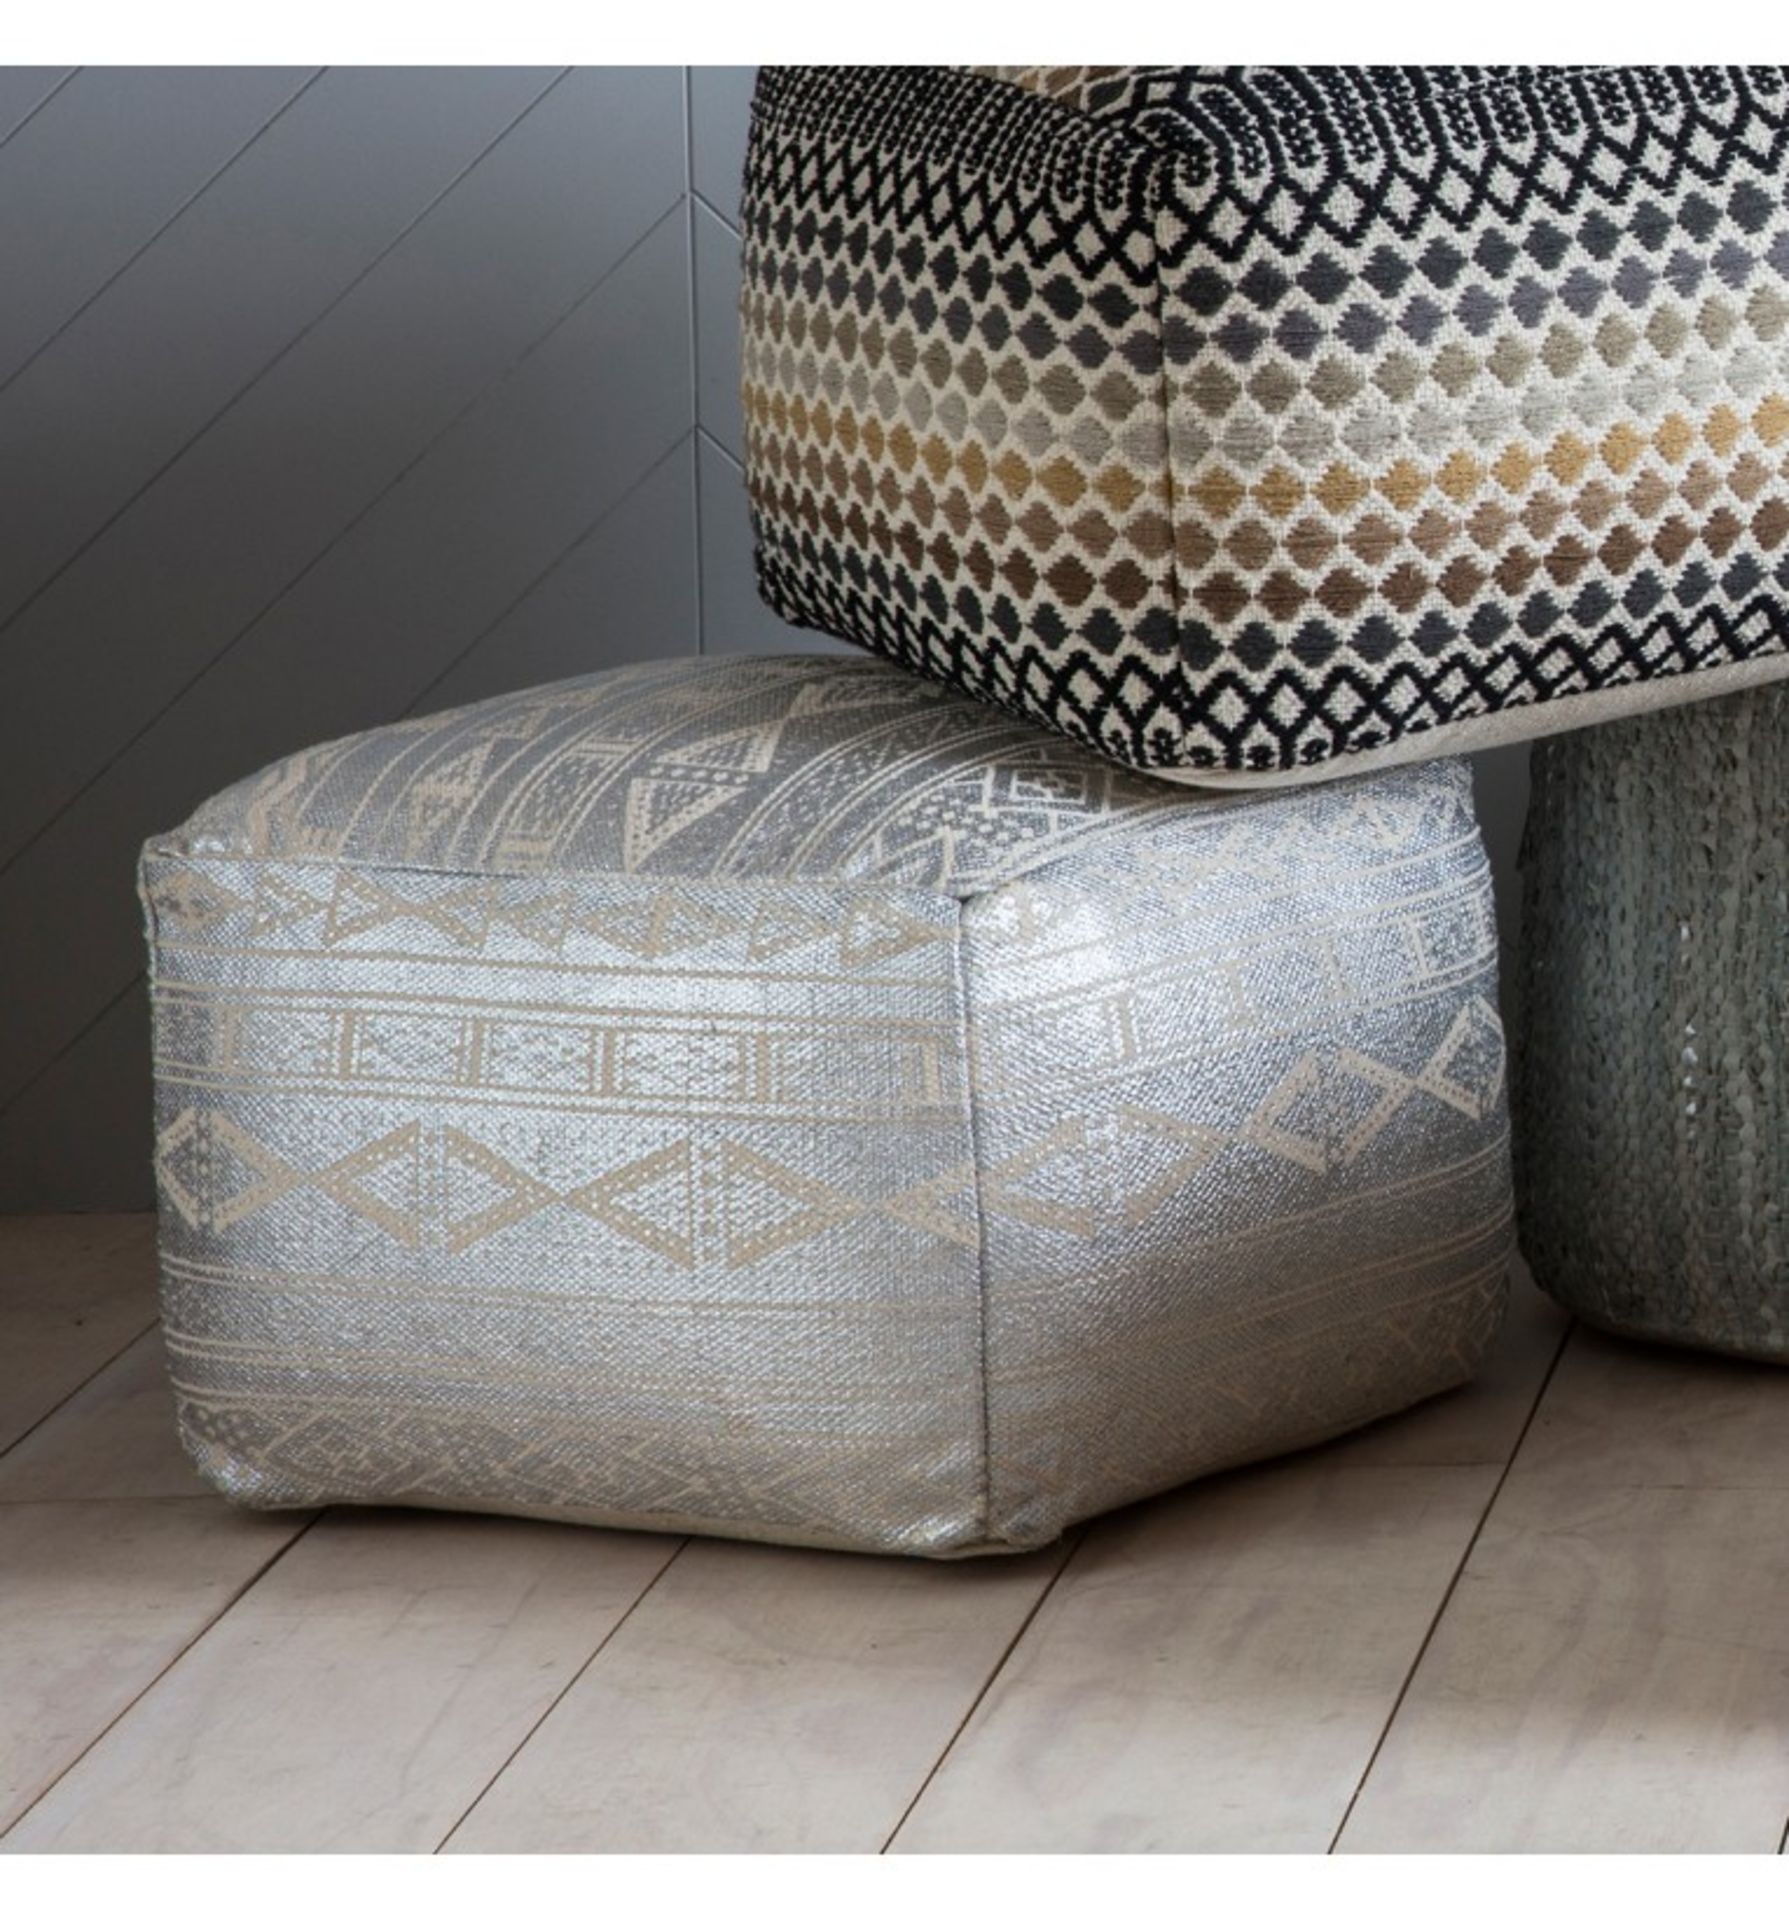 Metallica Pouffe Silver Practical and stylish, this metallic pouffe features a subtle design. This